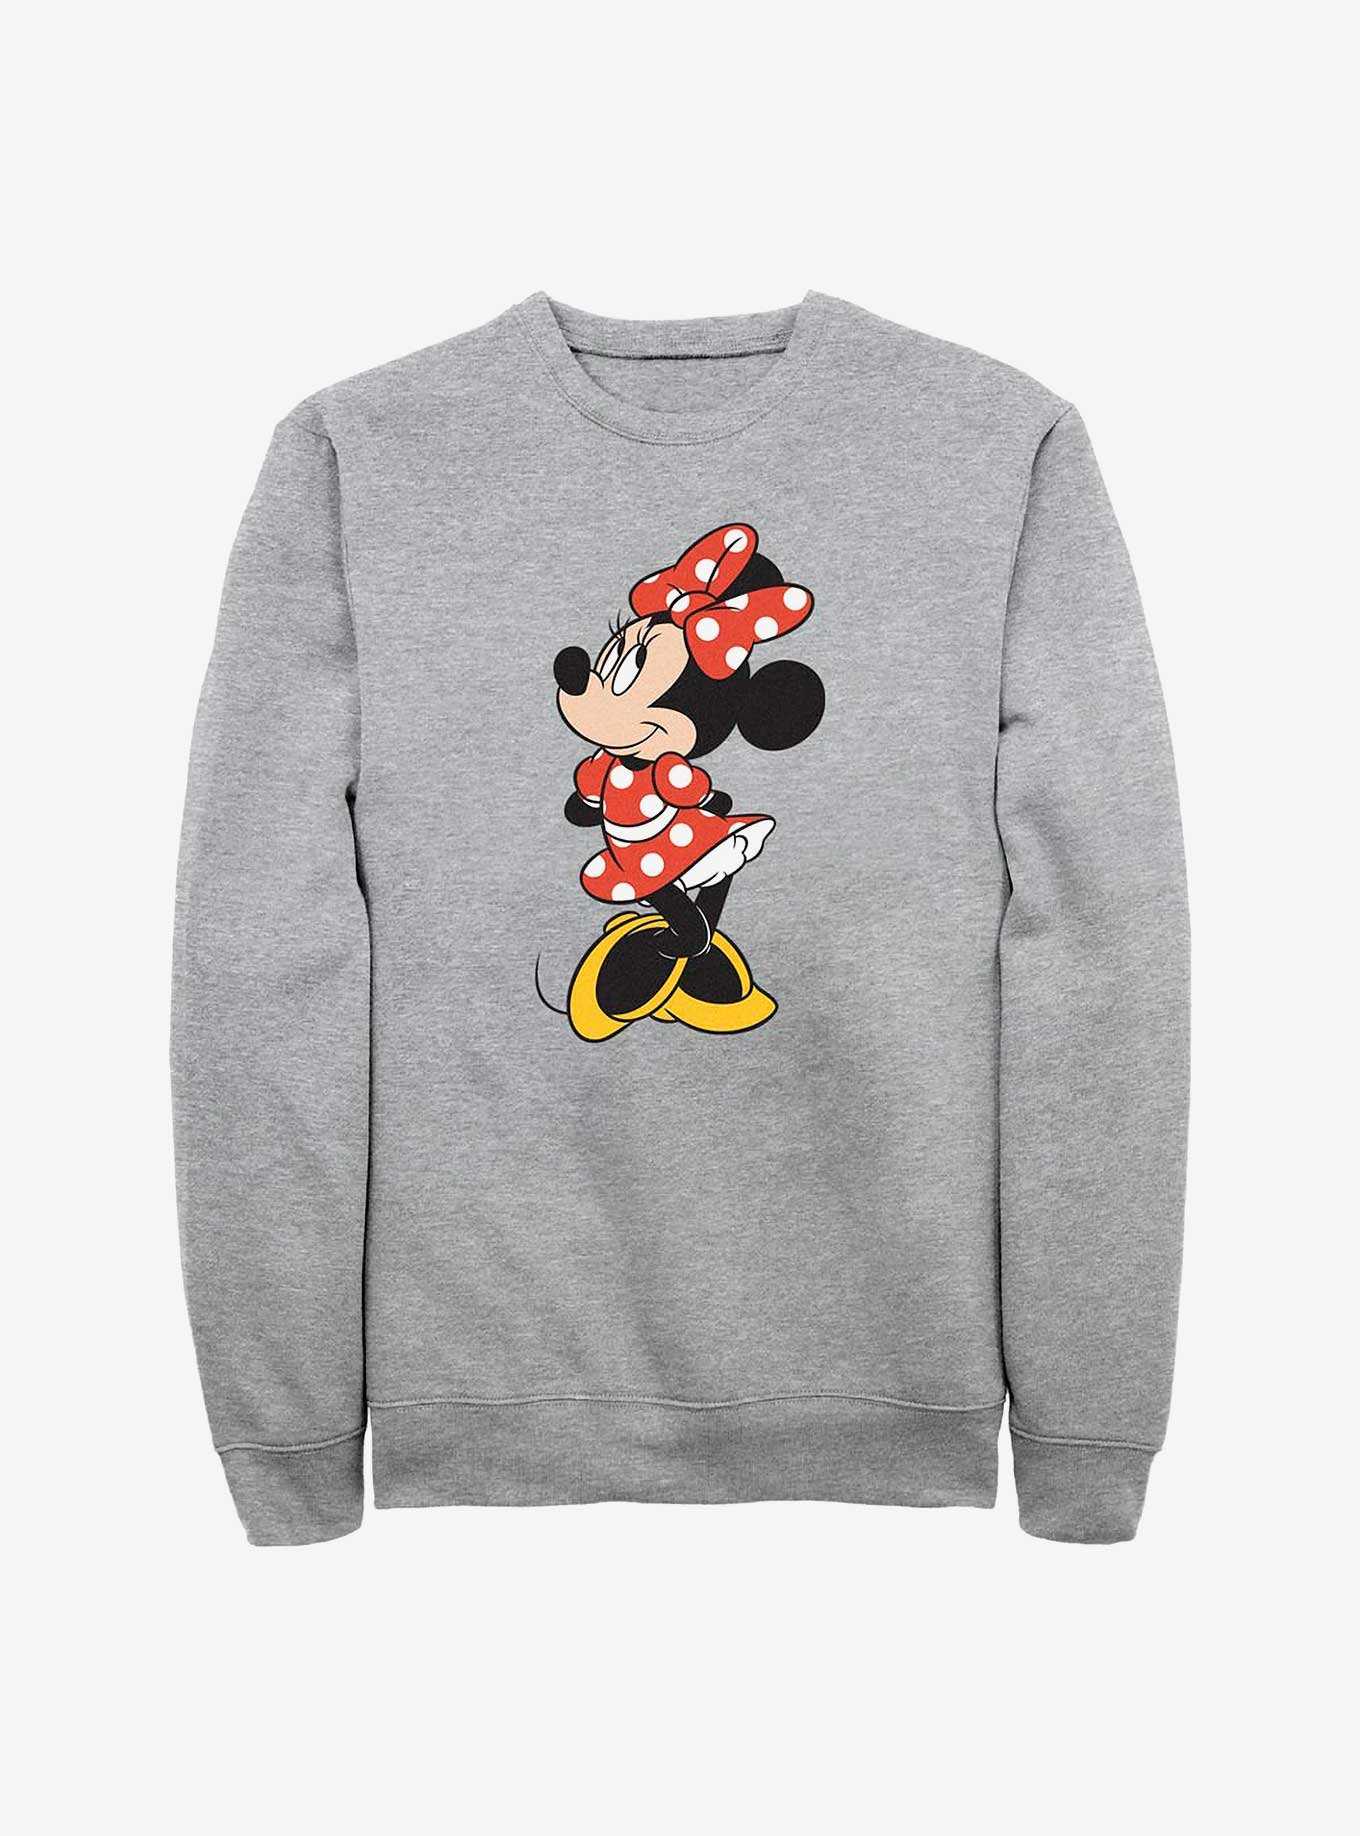 OFFICIAL Minnie Mouse Shirts & Merchandise Topic Hot 